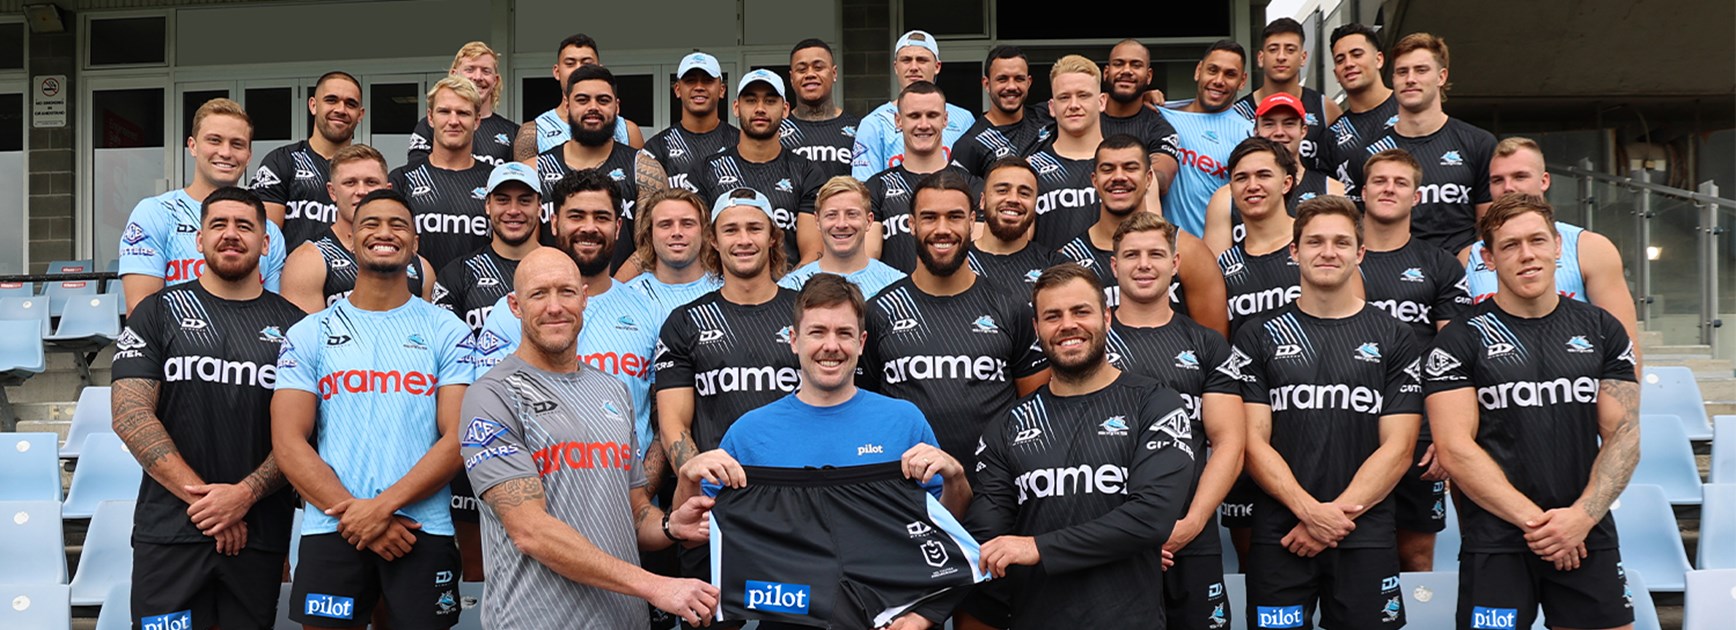 The Sharks and Pilot – the partnership behind Men’s Health